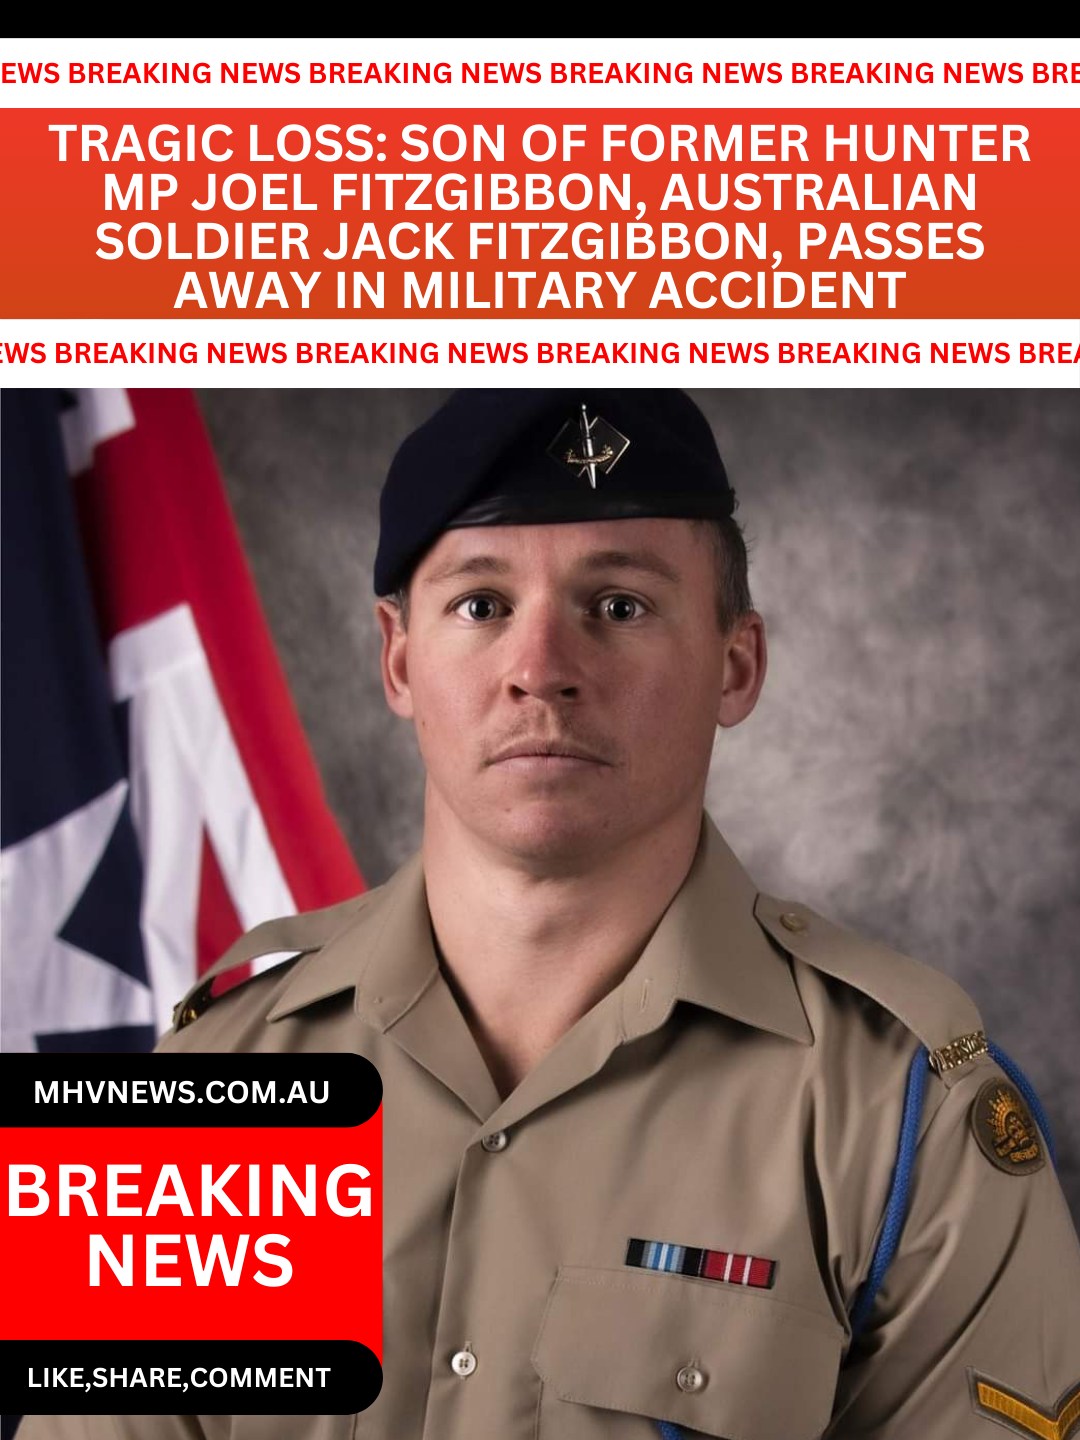 You are currently viewing Tragic Loss: Son of Former Hunter MP Joel Fitzgibbon, Australian Soldier Jack Fitzgibbon, Passes Away in Military Accident